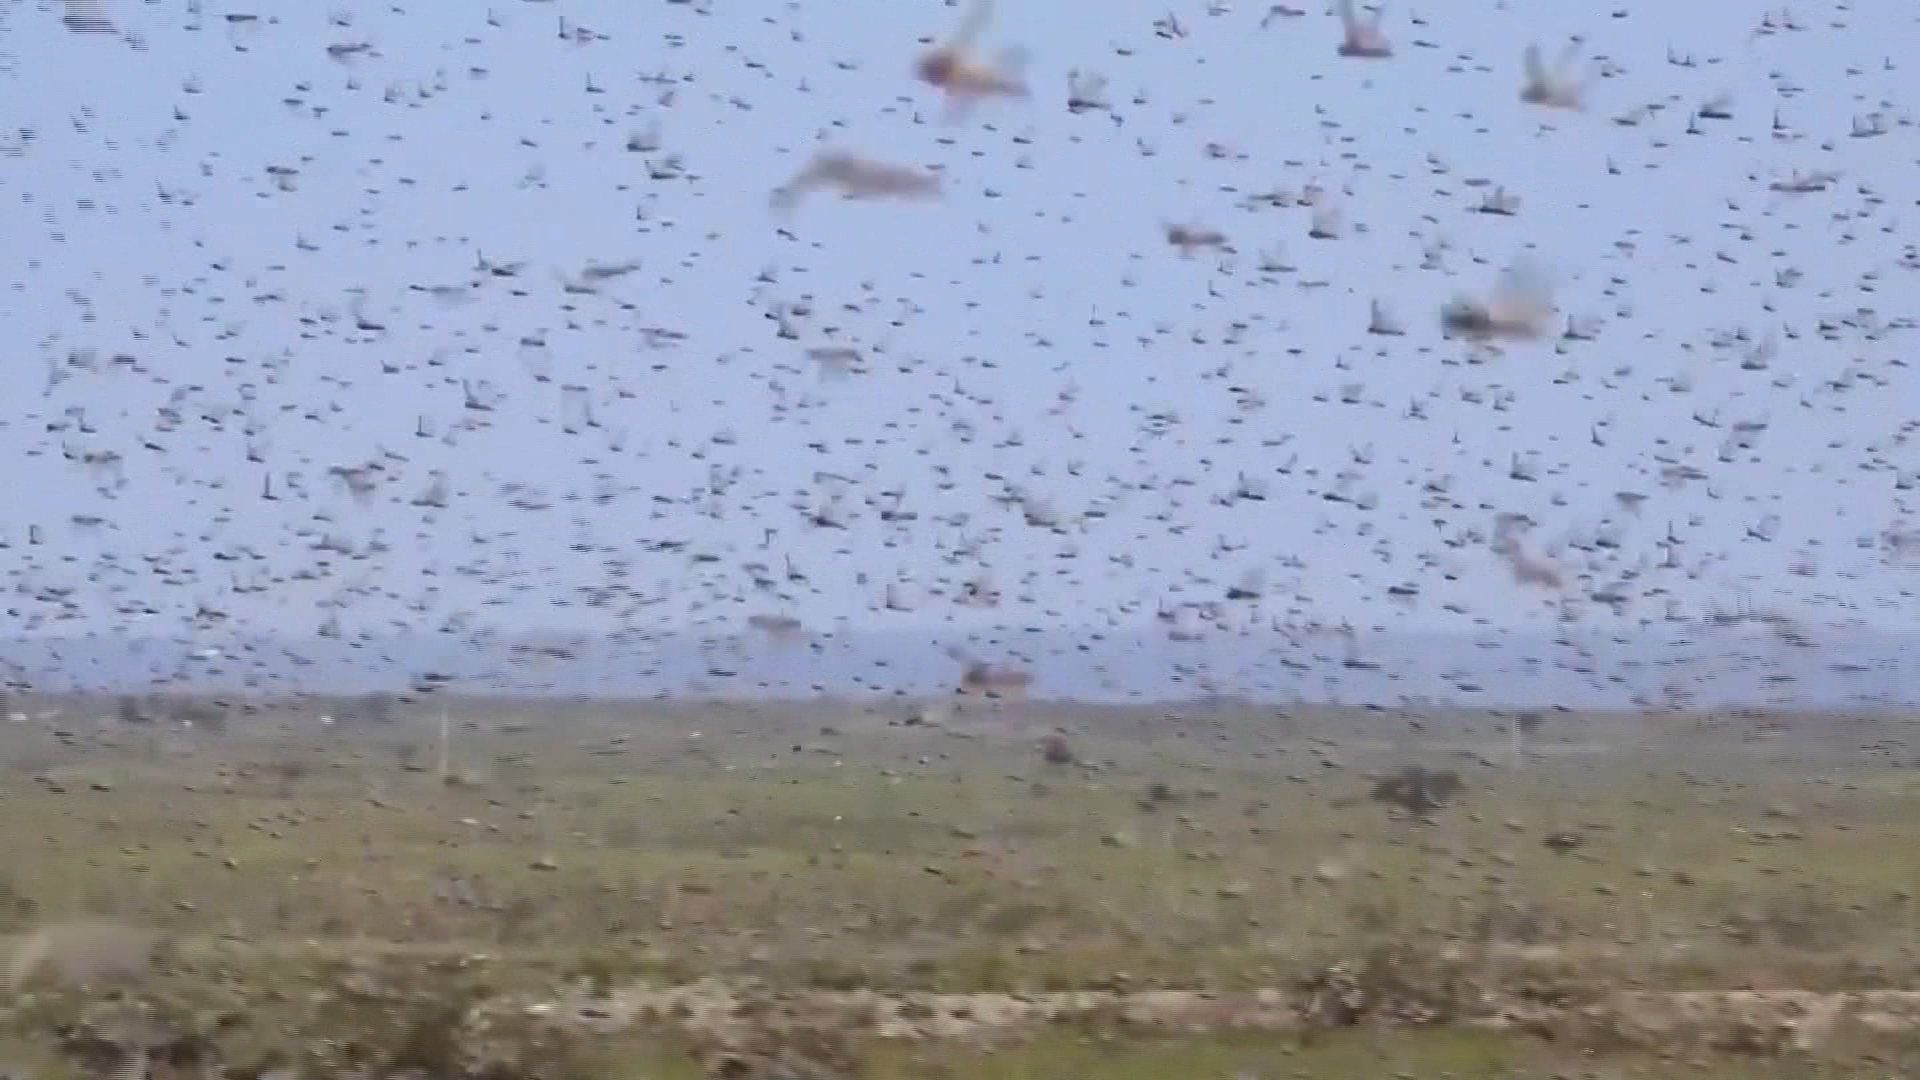 See massive insect swarm that may threaten millions - CNN Video